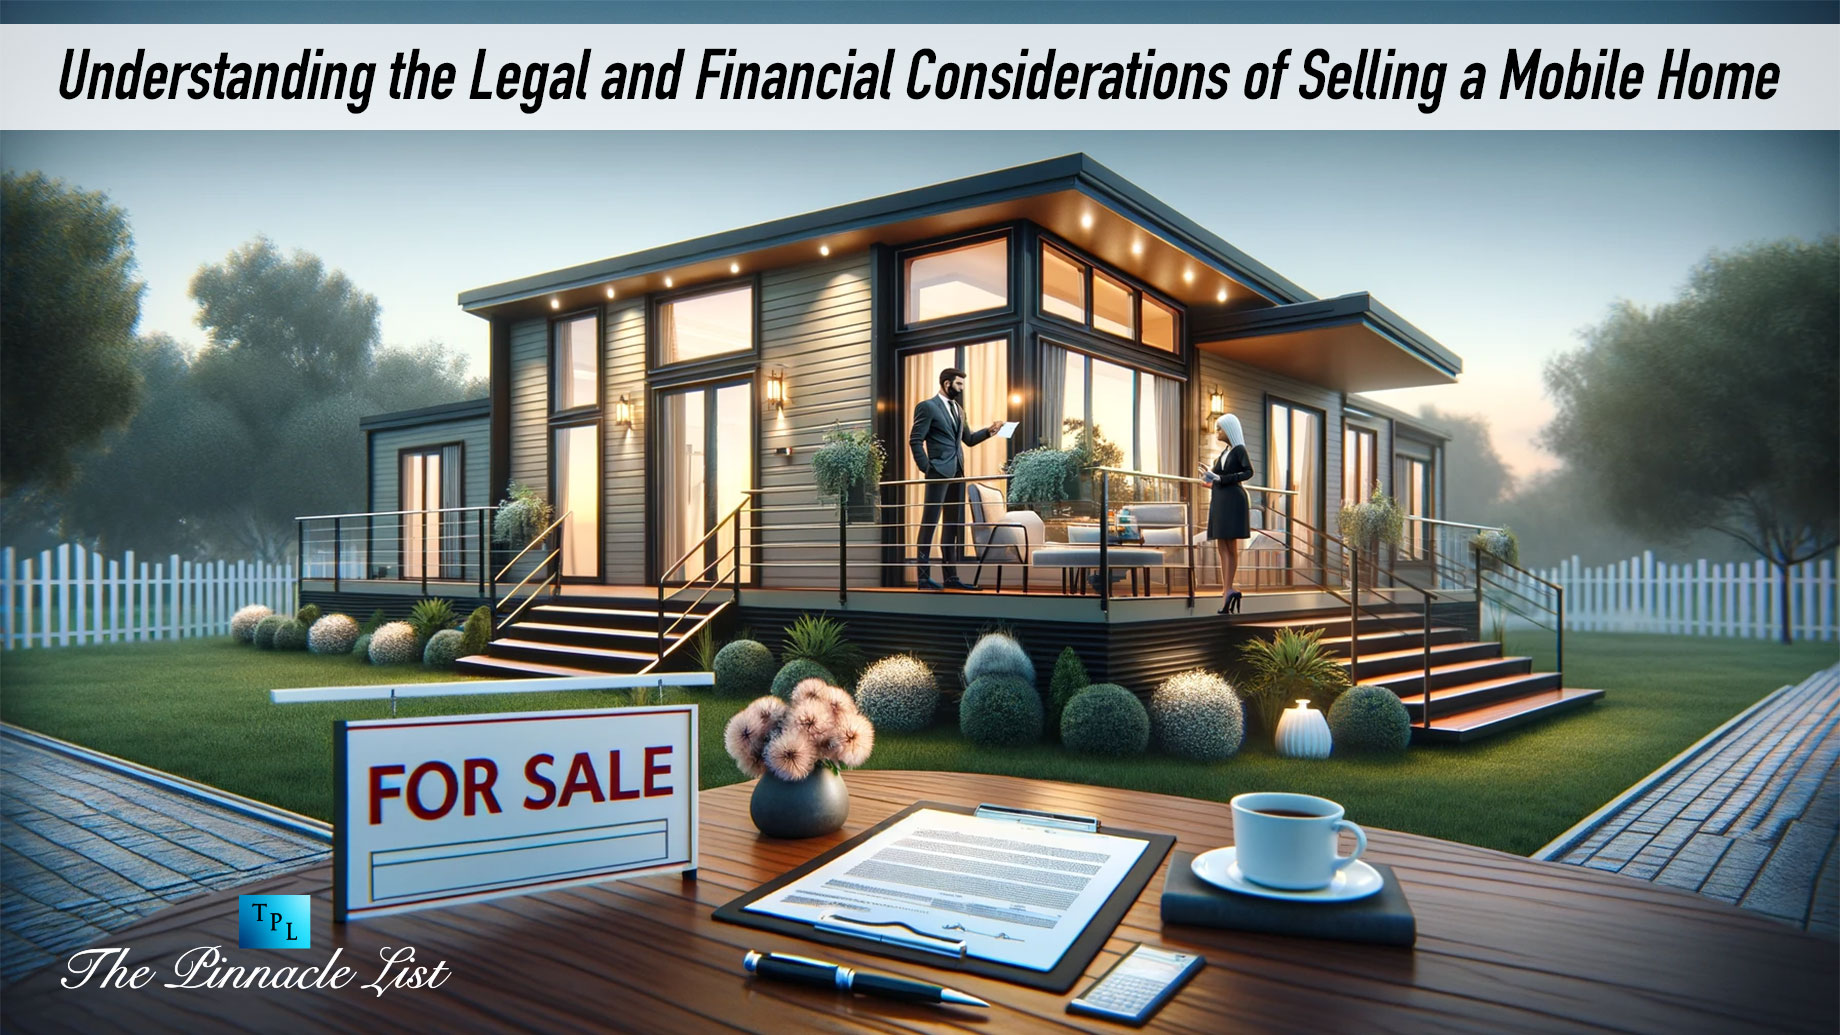 Understanding the Legal and Financial Considerations of Selling a Mobile Home